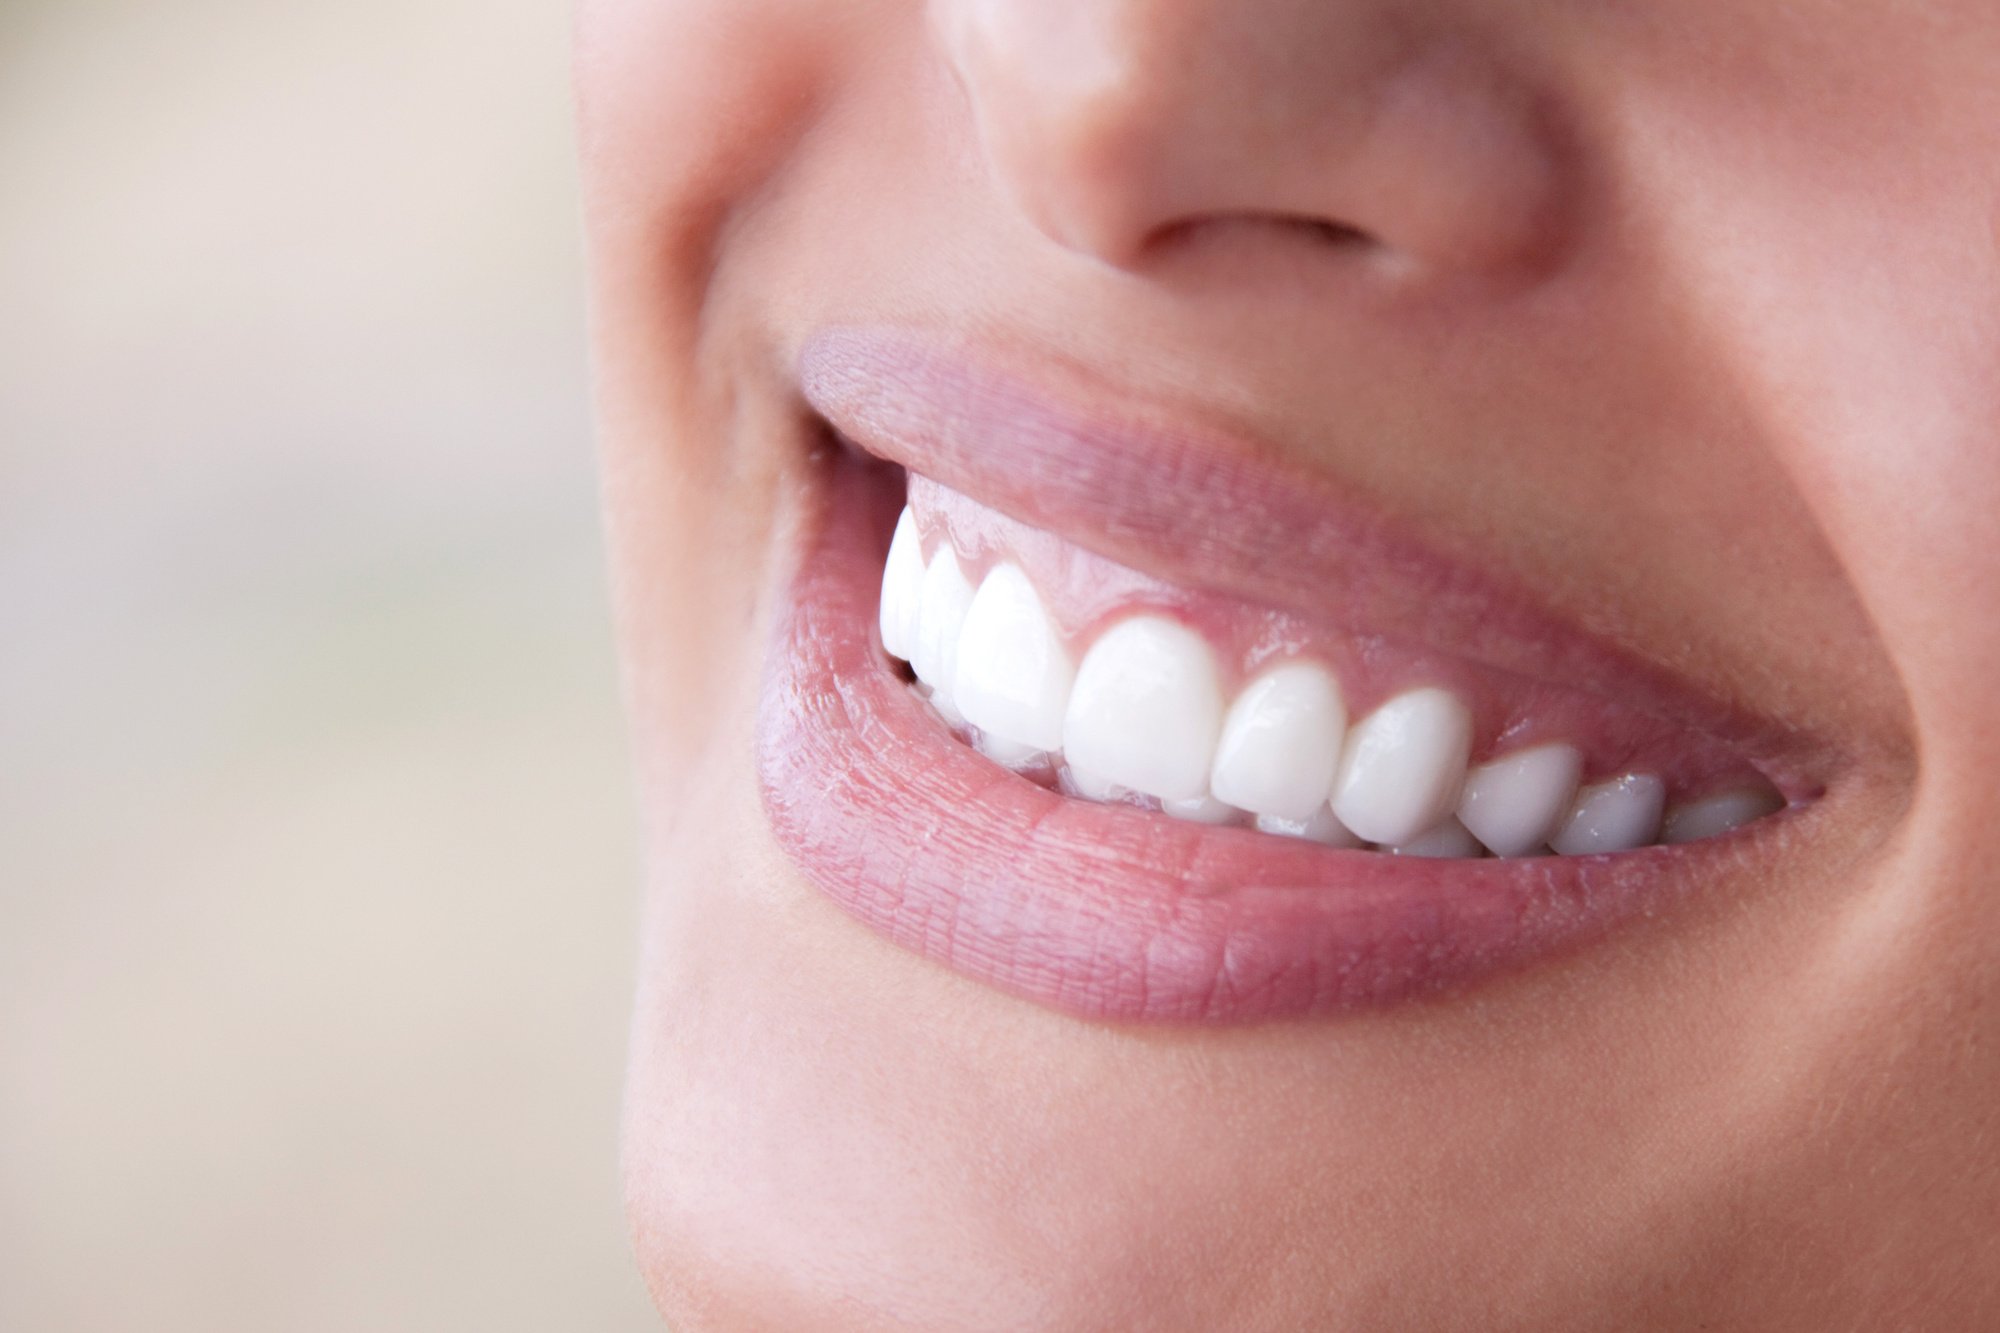 Are you planning on getting dental veneers in the near future? Learn all about the dental veneer process in this blog and prepare yourself accordingly.